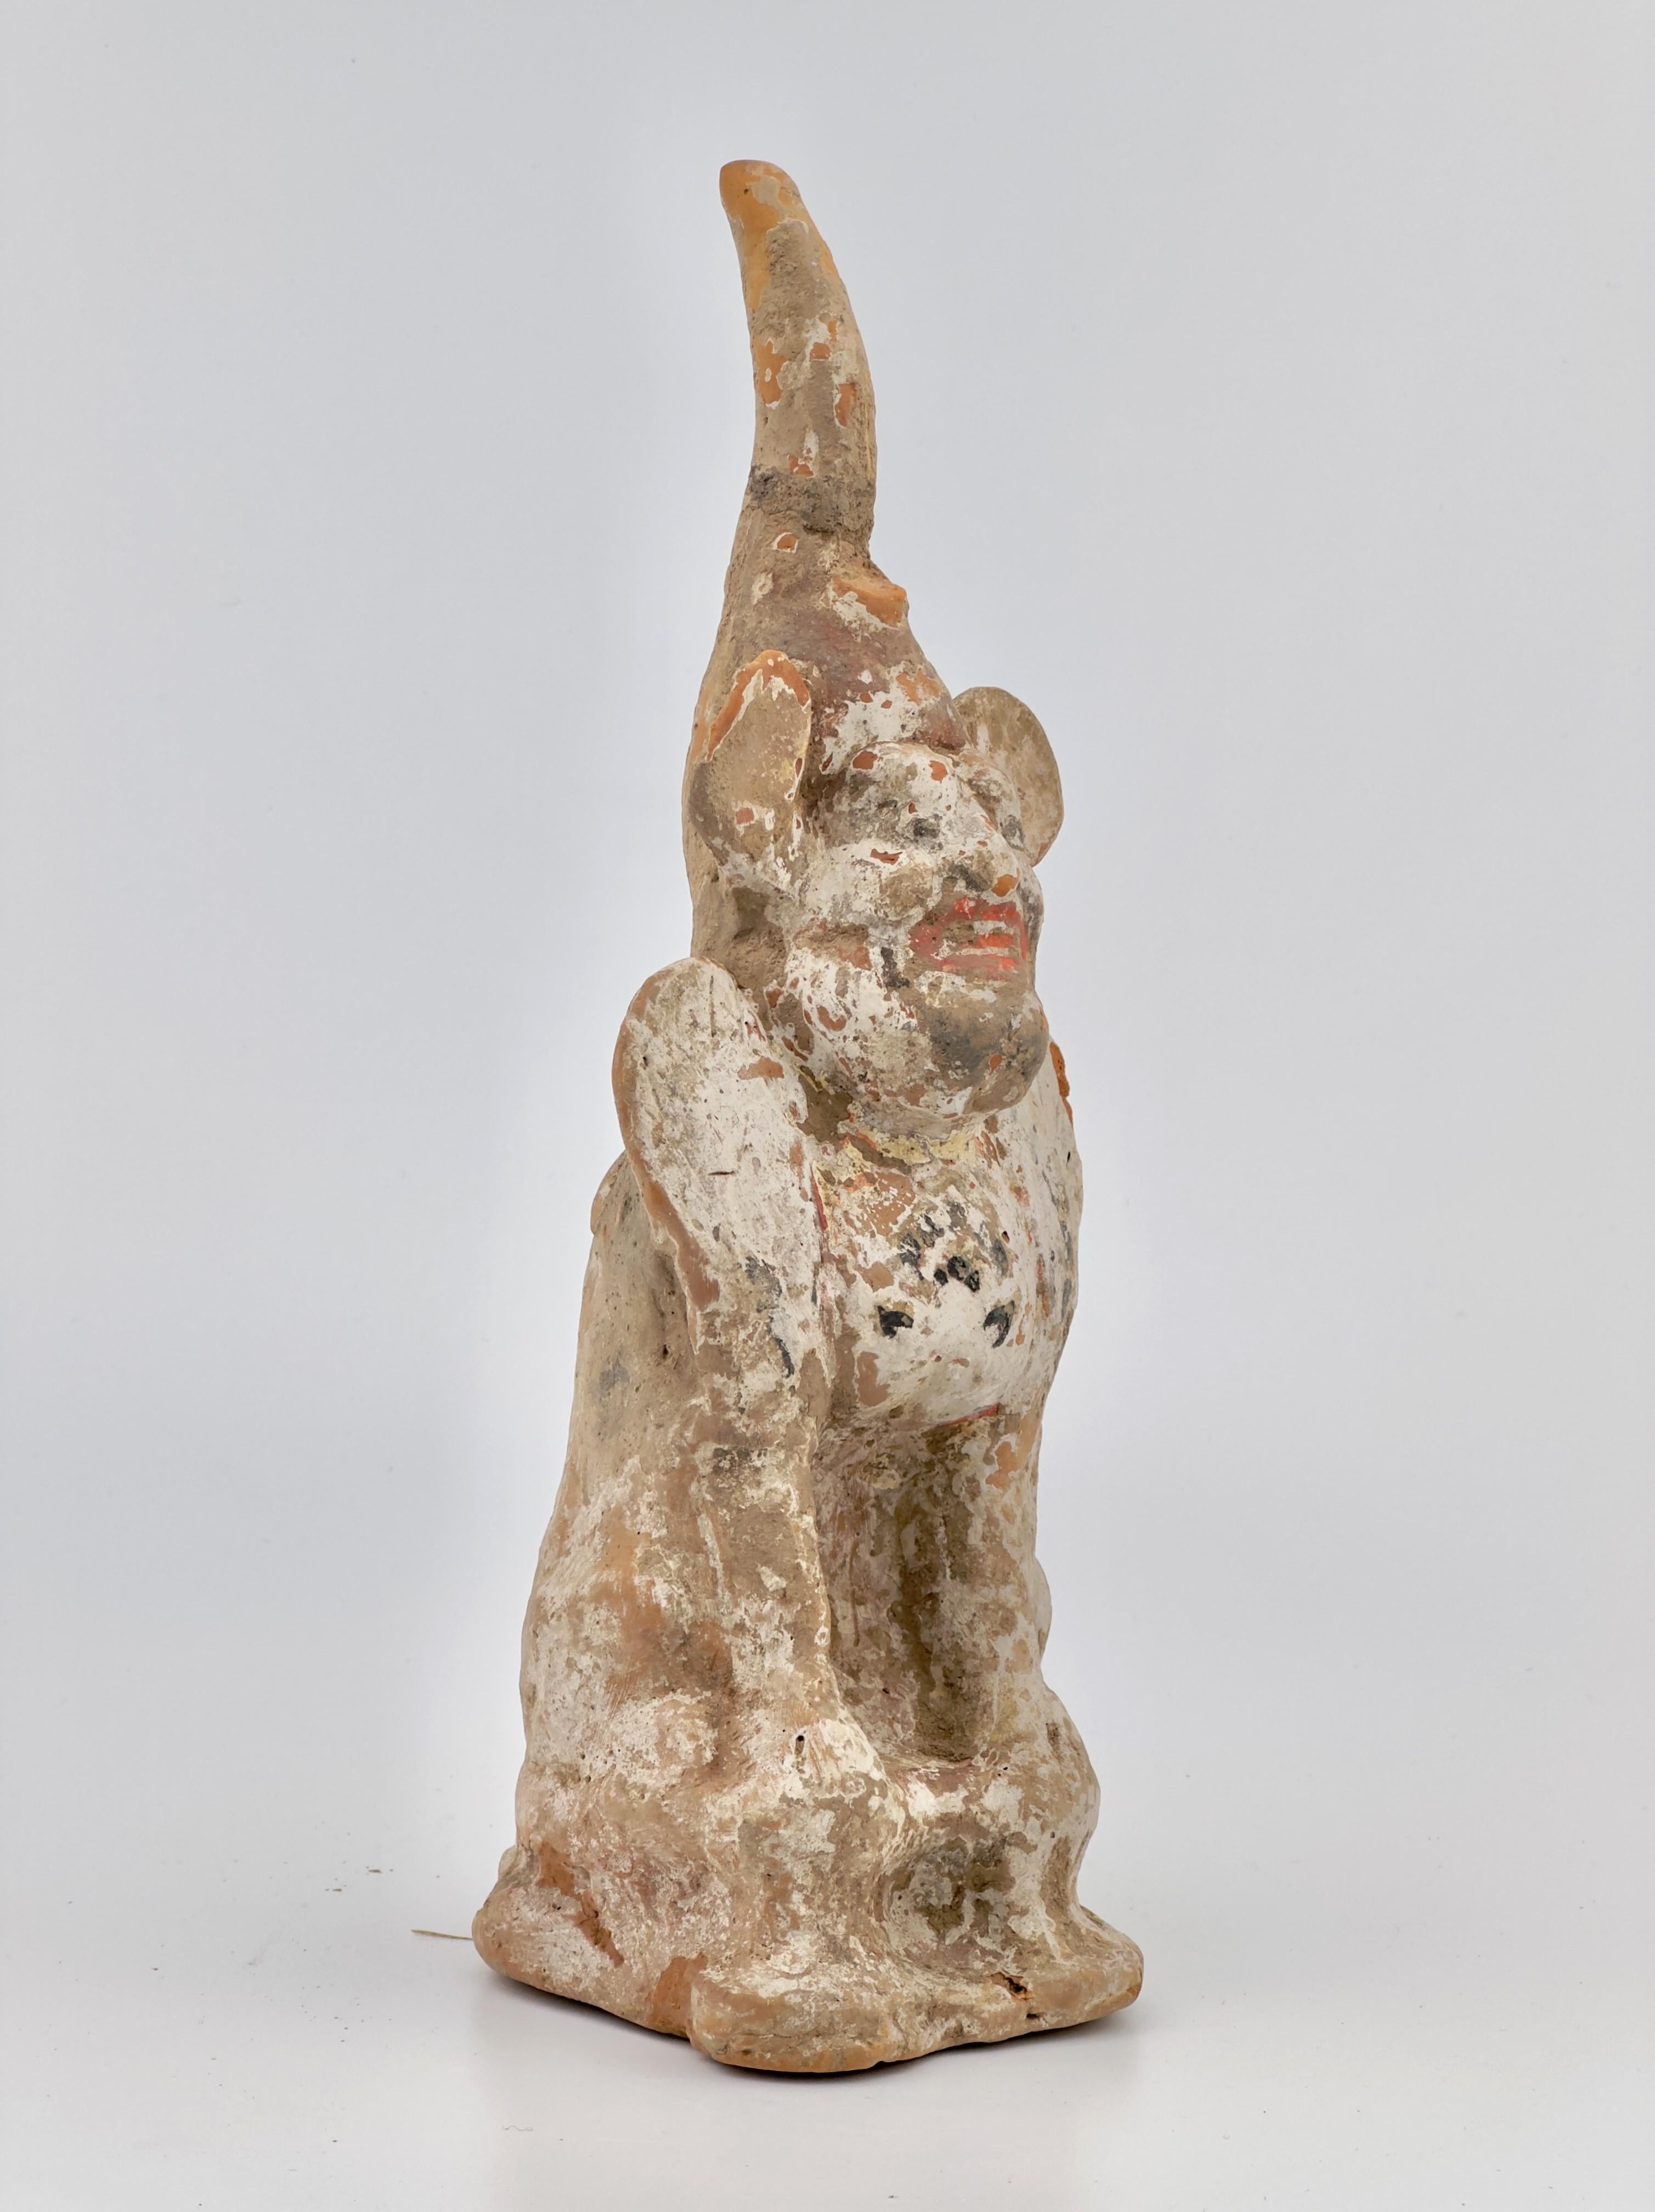 This figure appears to be a terracotta statuette, possibly representing a court official or a deity given the distinct headgear which could signify a rank or divine attribute. The style of the figurine, with its facial features and remnants of